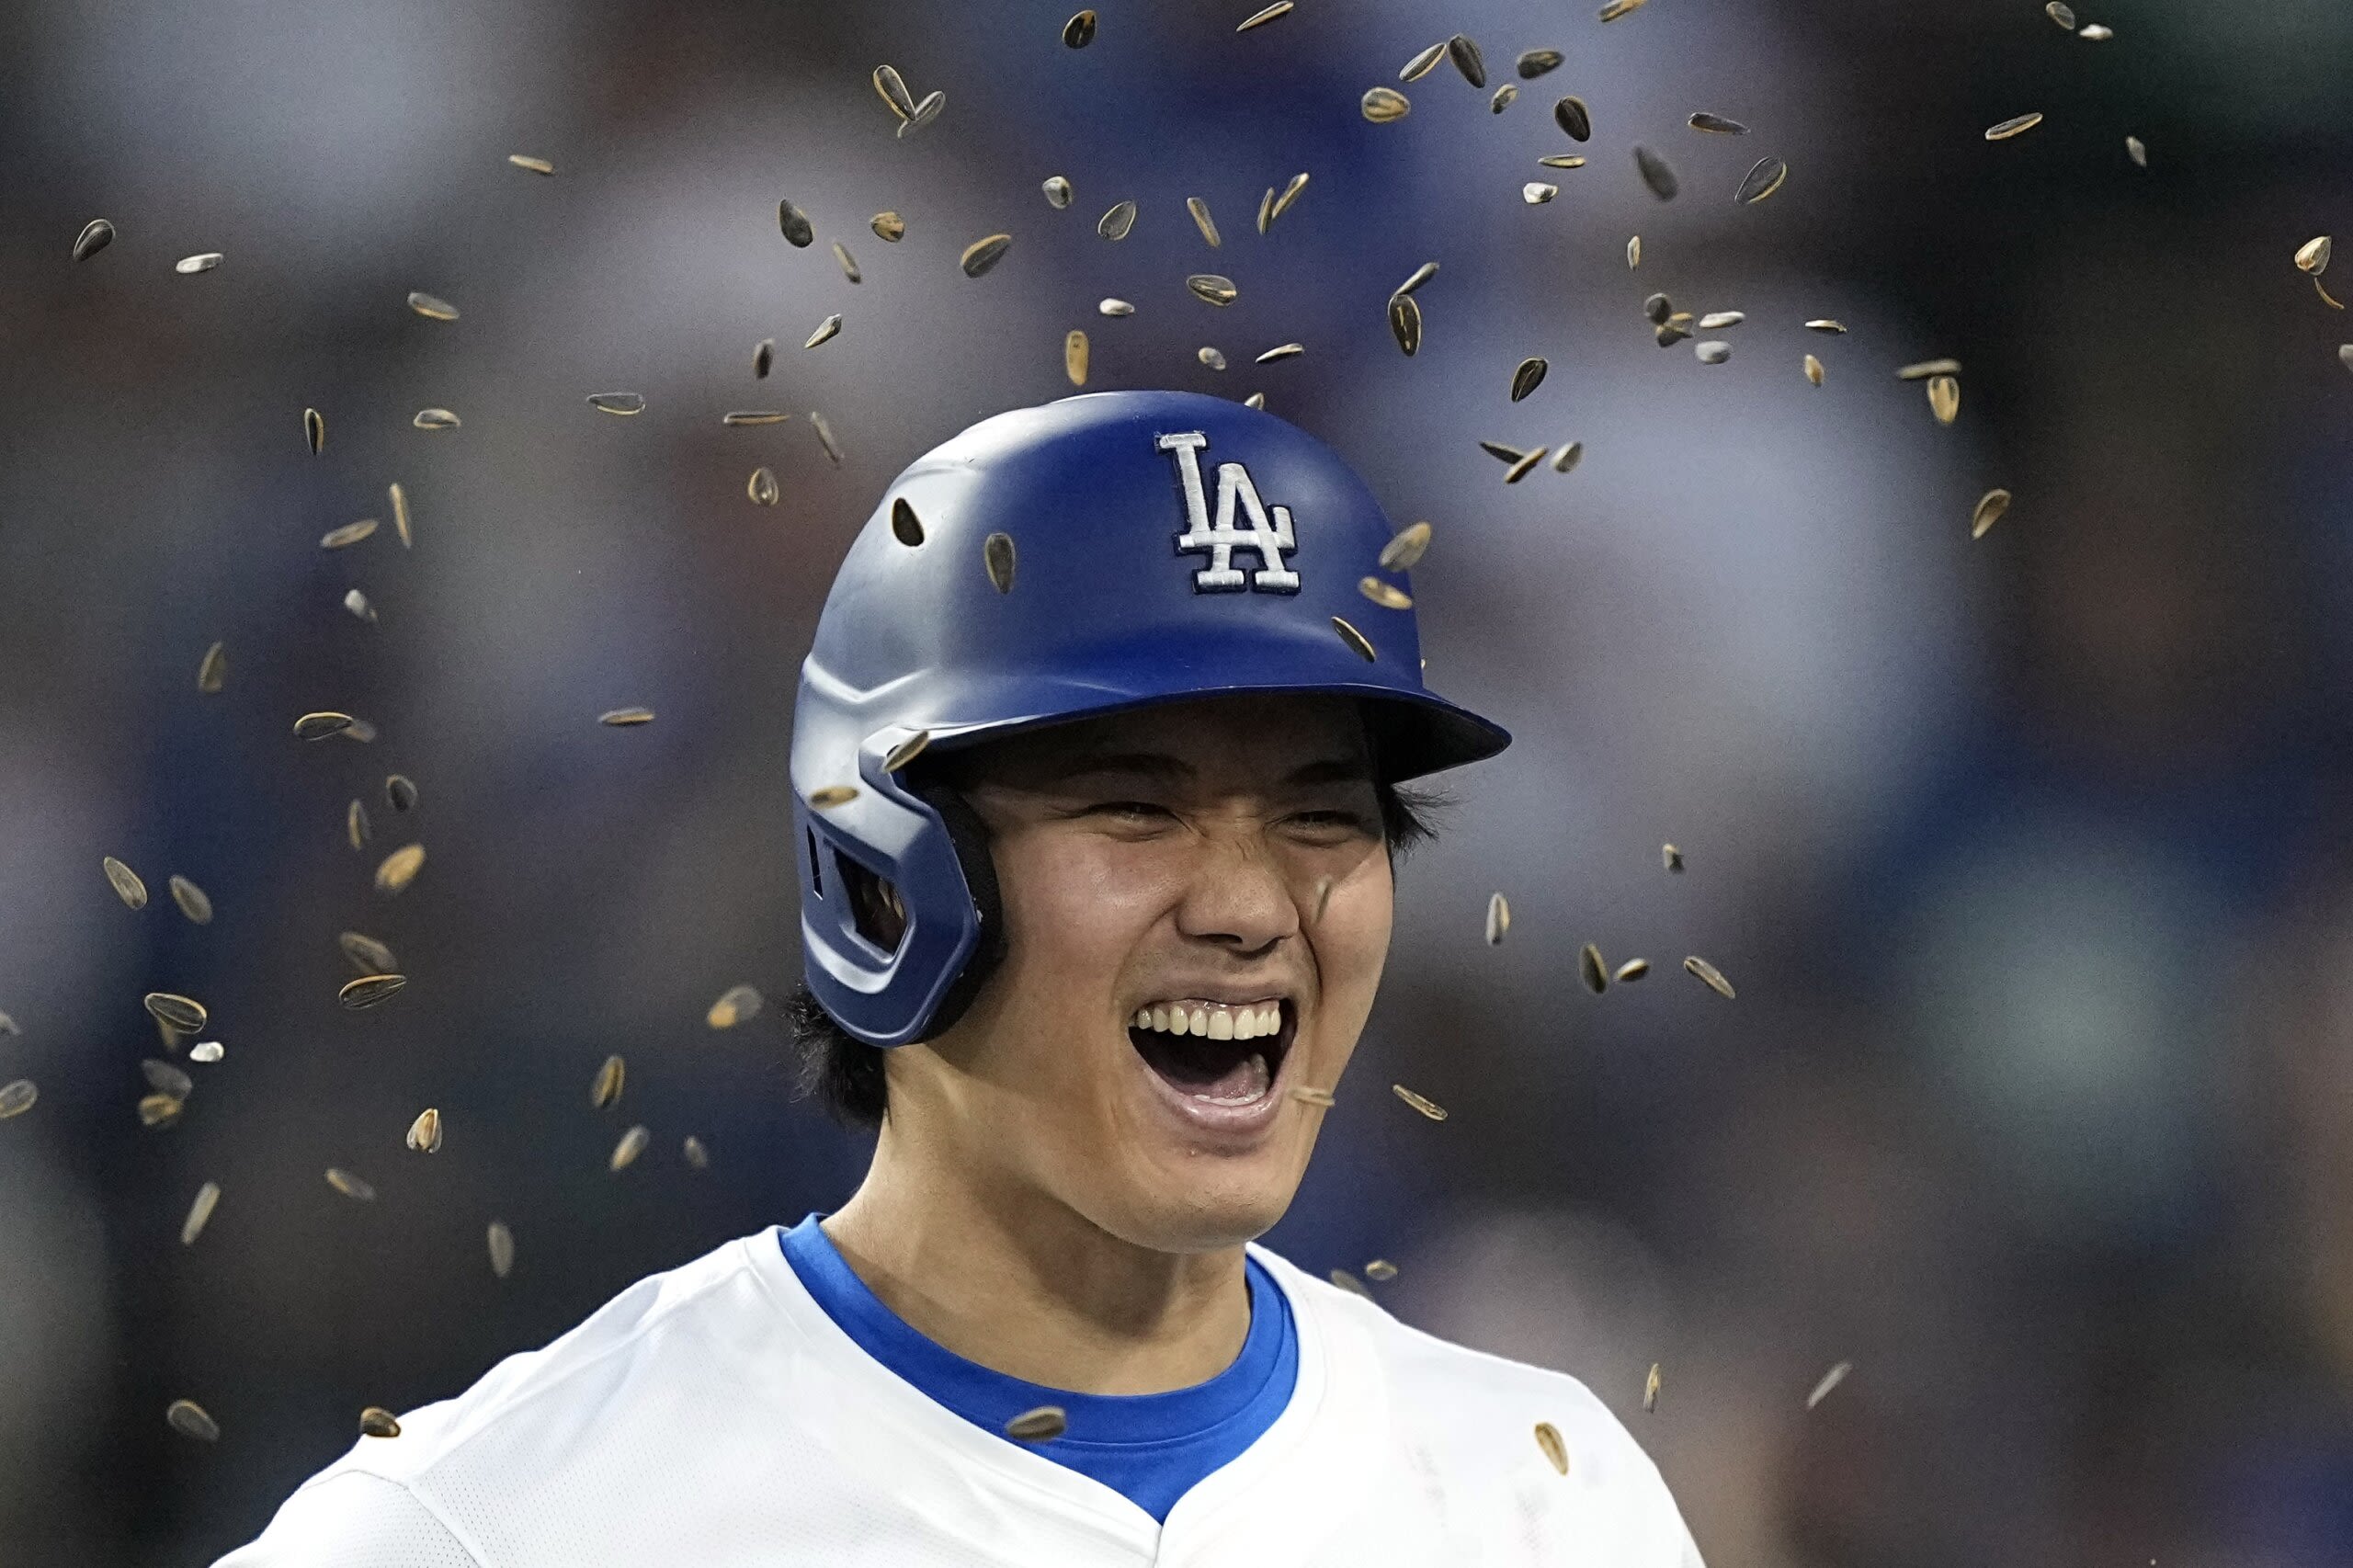 Ohtani hits 2-run homer and scores go-ahead run on his special day in LA as Dodgers beat Reds 7-3 - WTOP News